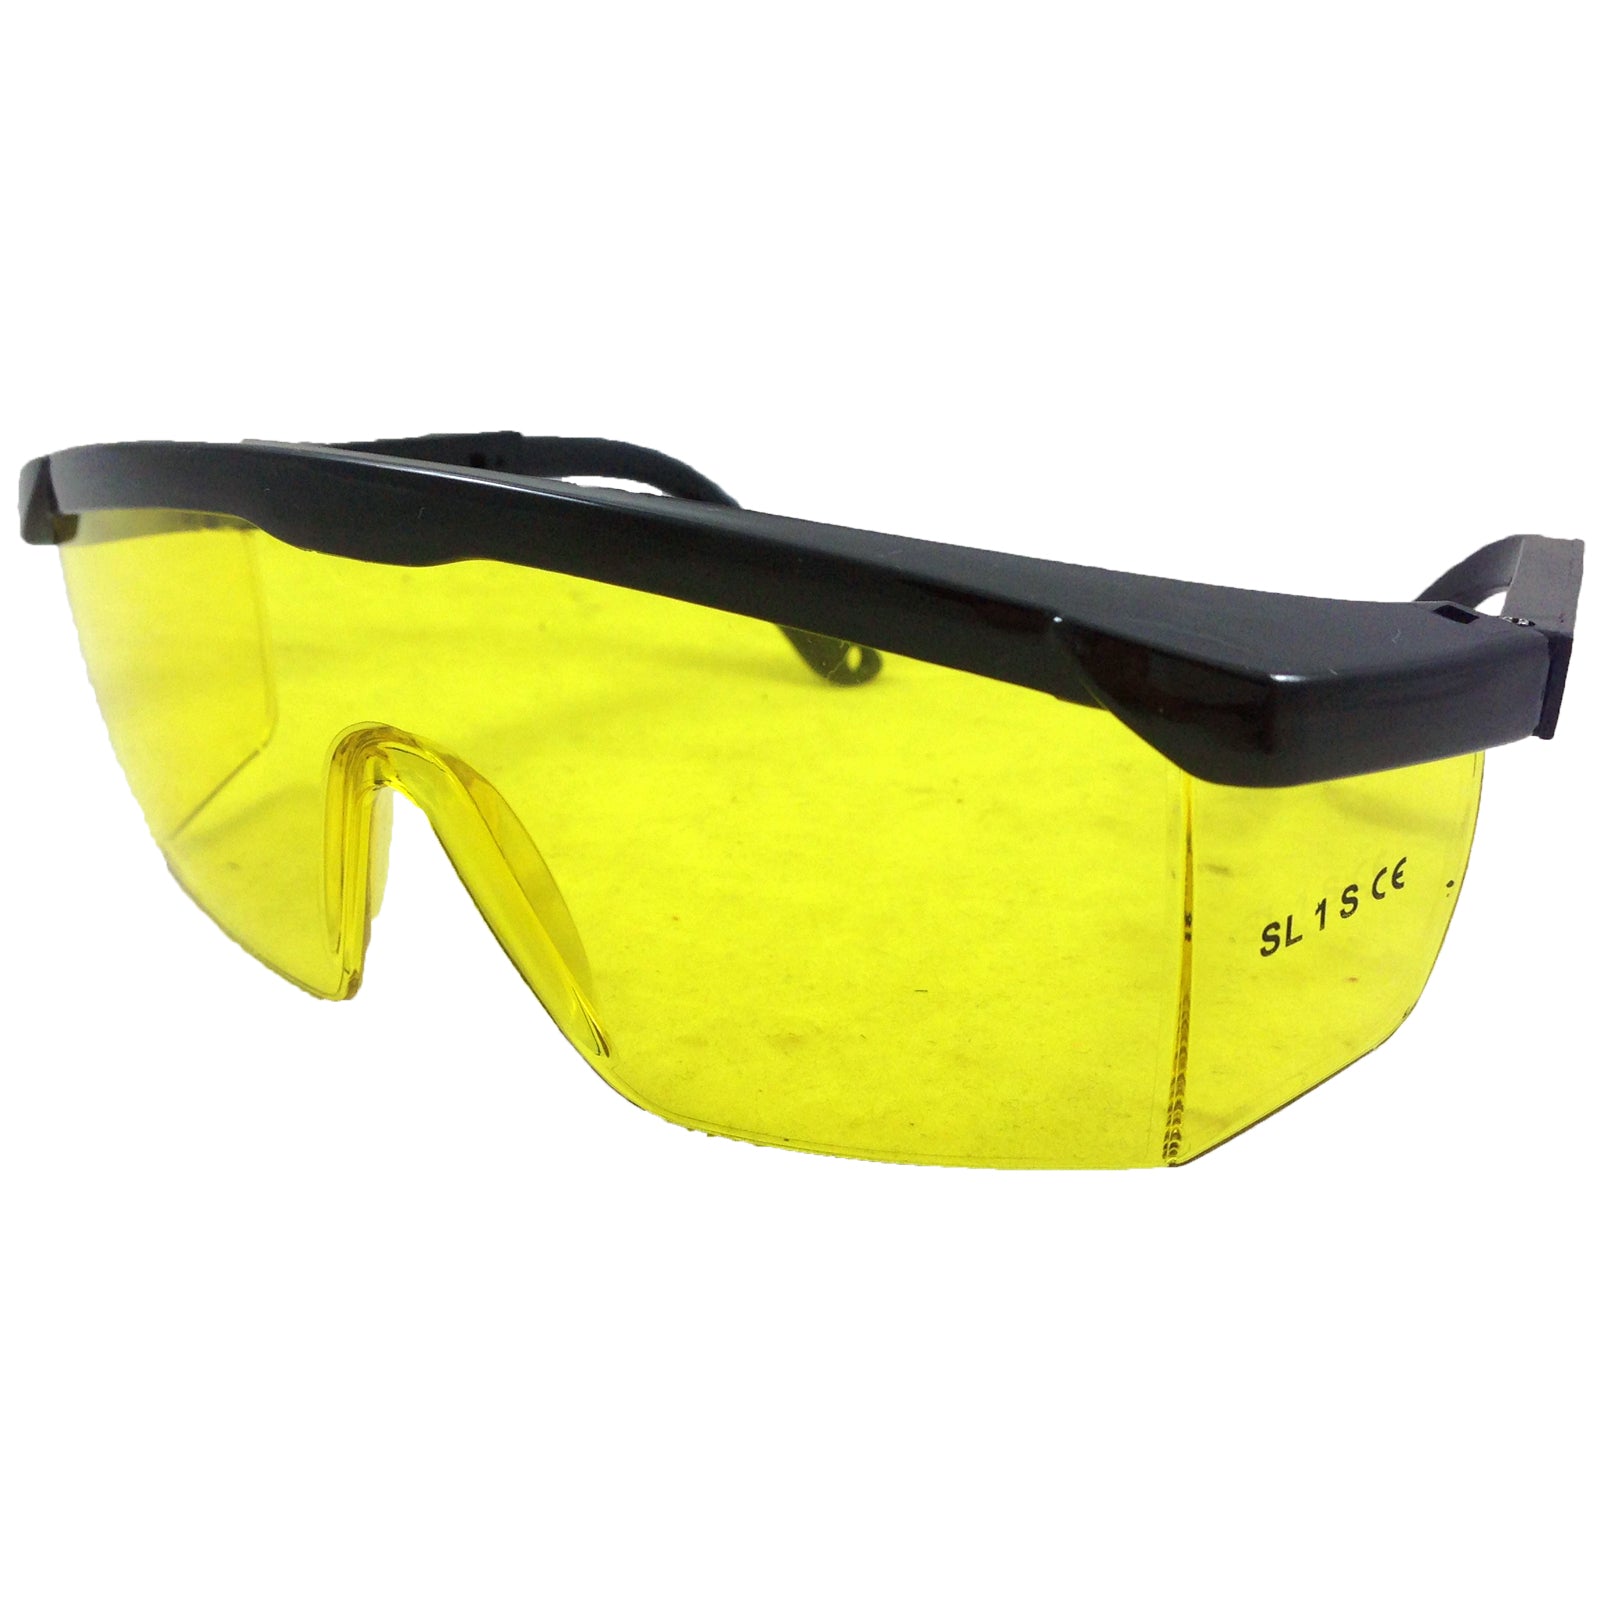 Amtech Safety Glasses Yellow Lens PPE Eye Protection